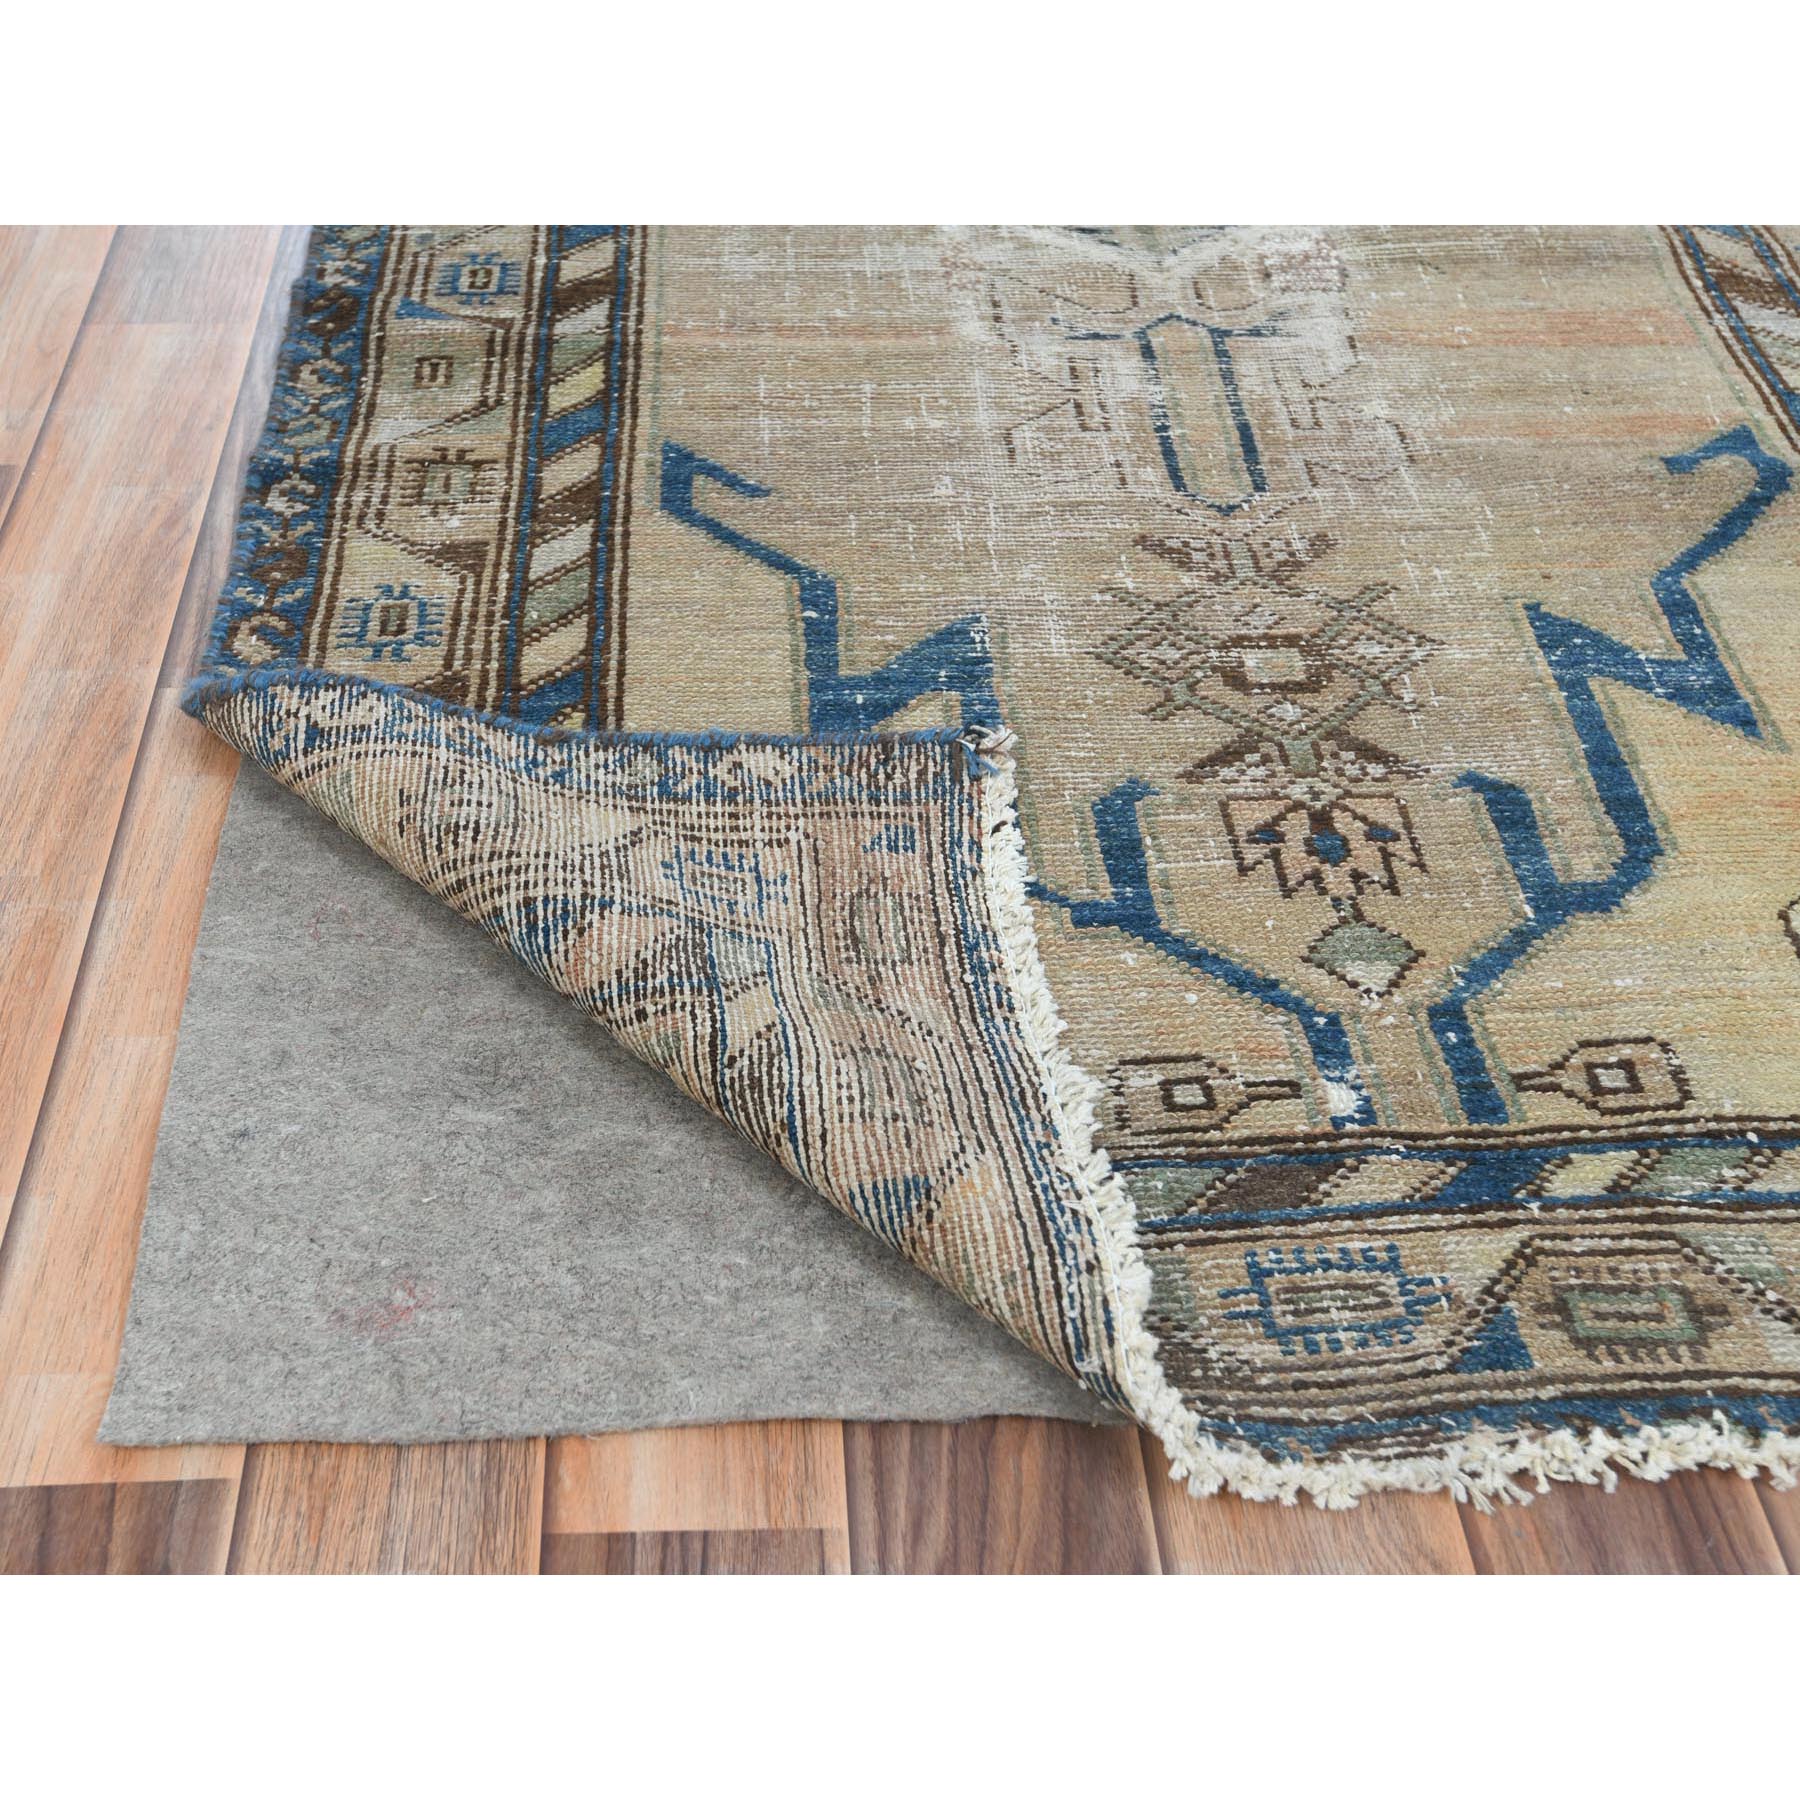 3'3"x6'8" Light Brown, Hand Woven Vintage Persian Mazlaghan, Pure Wool, Cropped Thin, Distressed Look Wide Runner Oriental Rug 